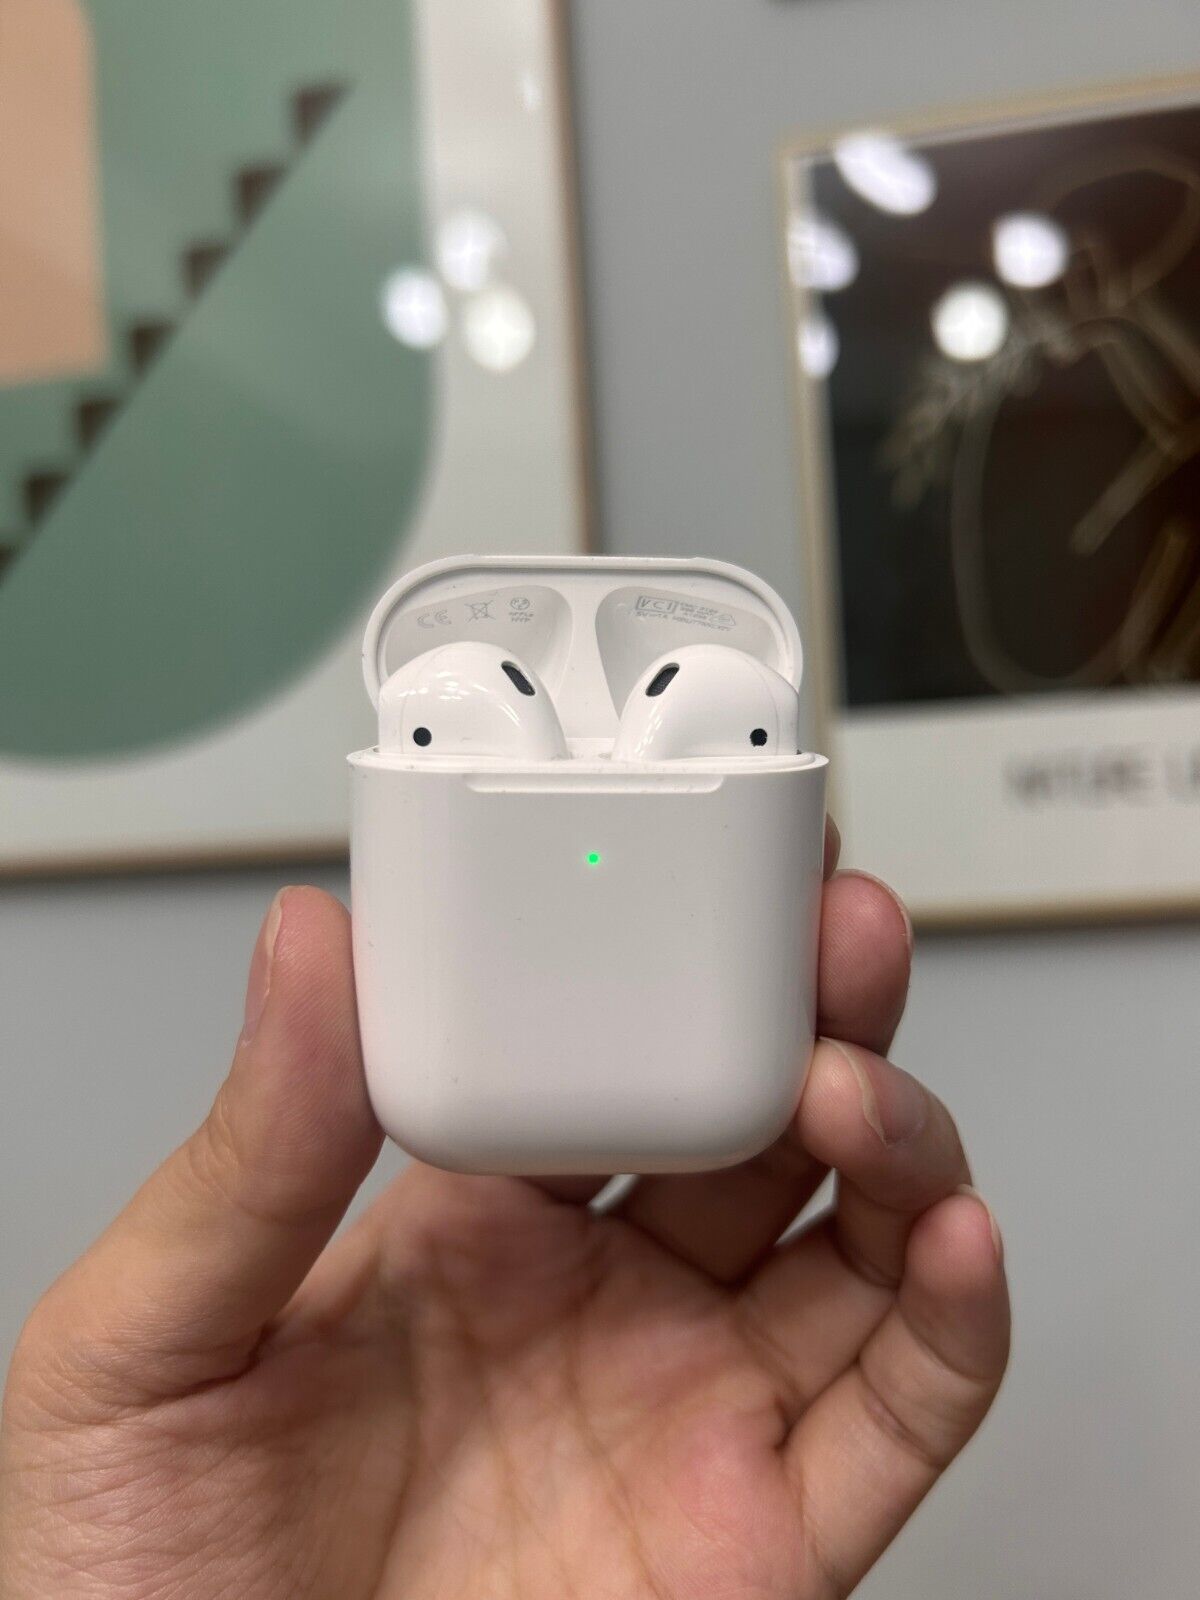 Apple AirPods 2nd Generation with Charging Case - White